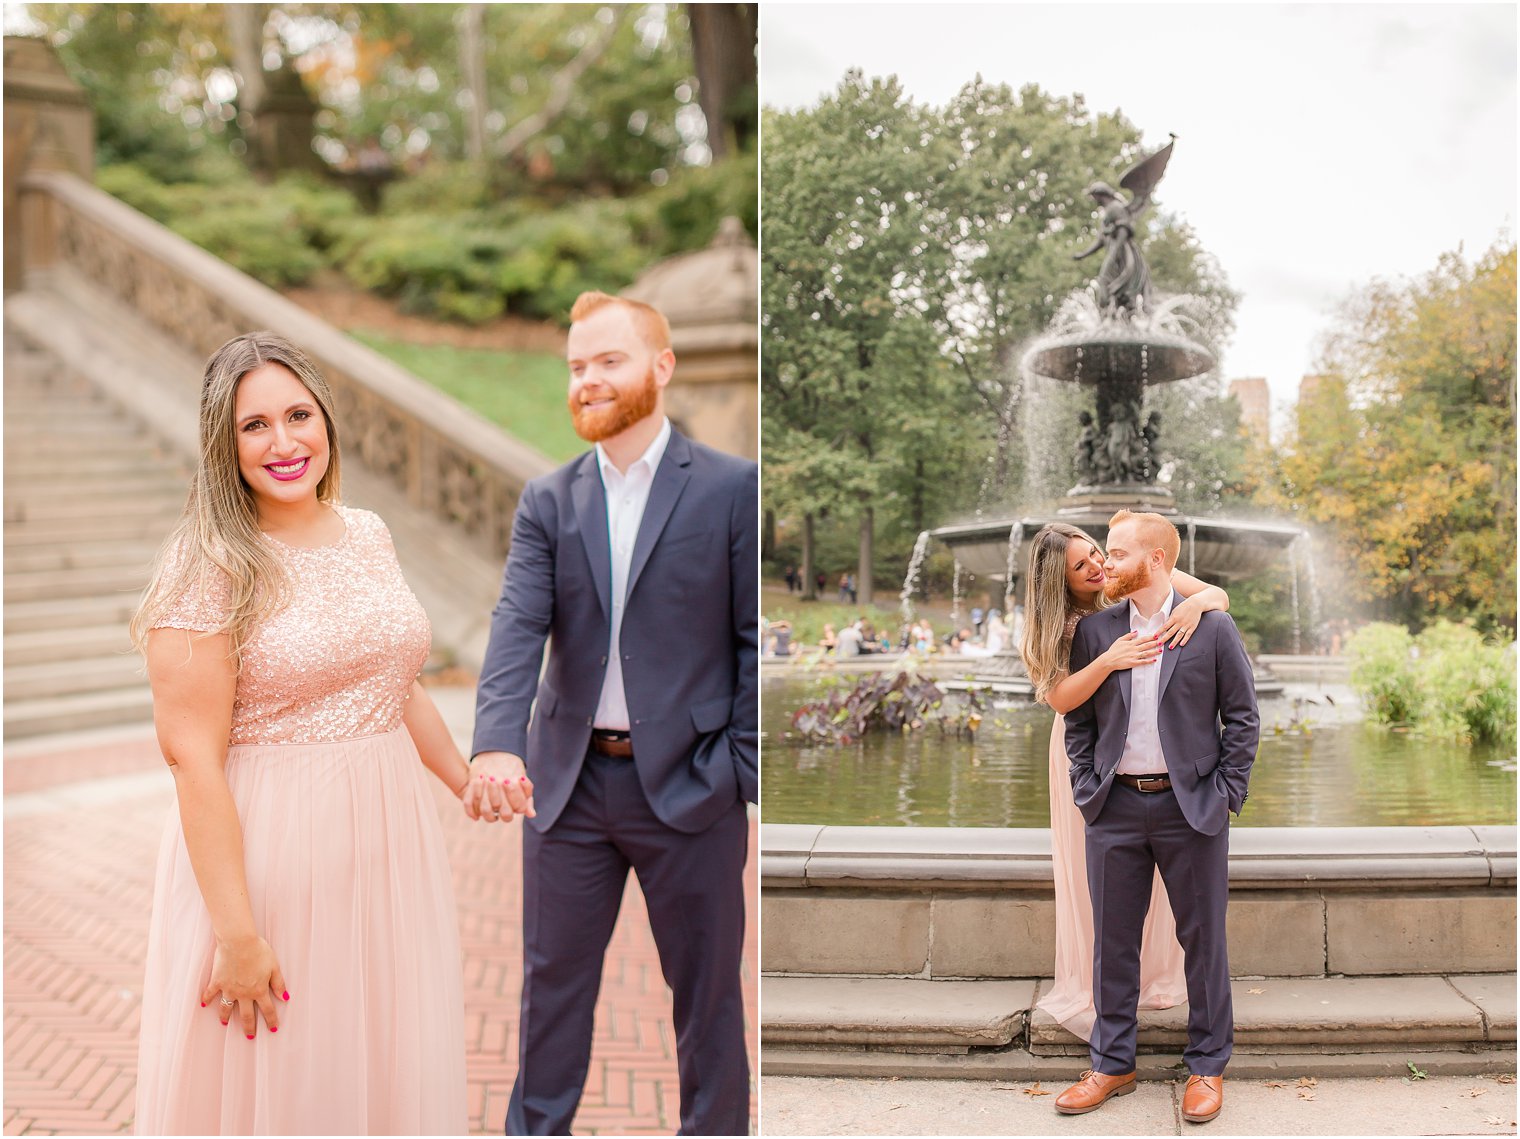 Engagement session at Bethesda Fountain in Central Park